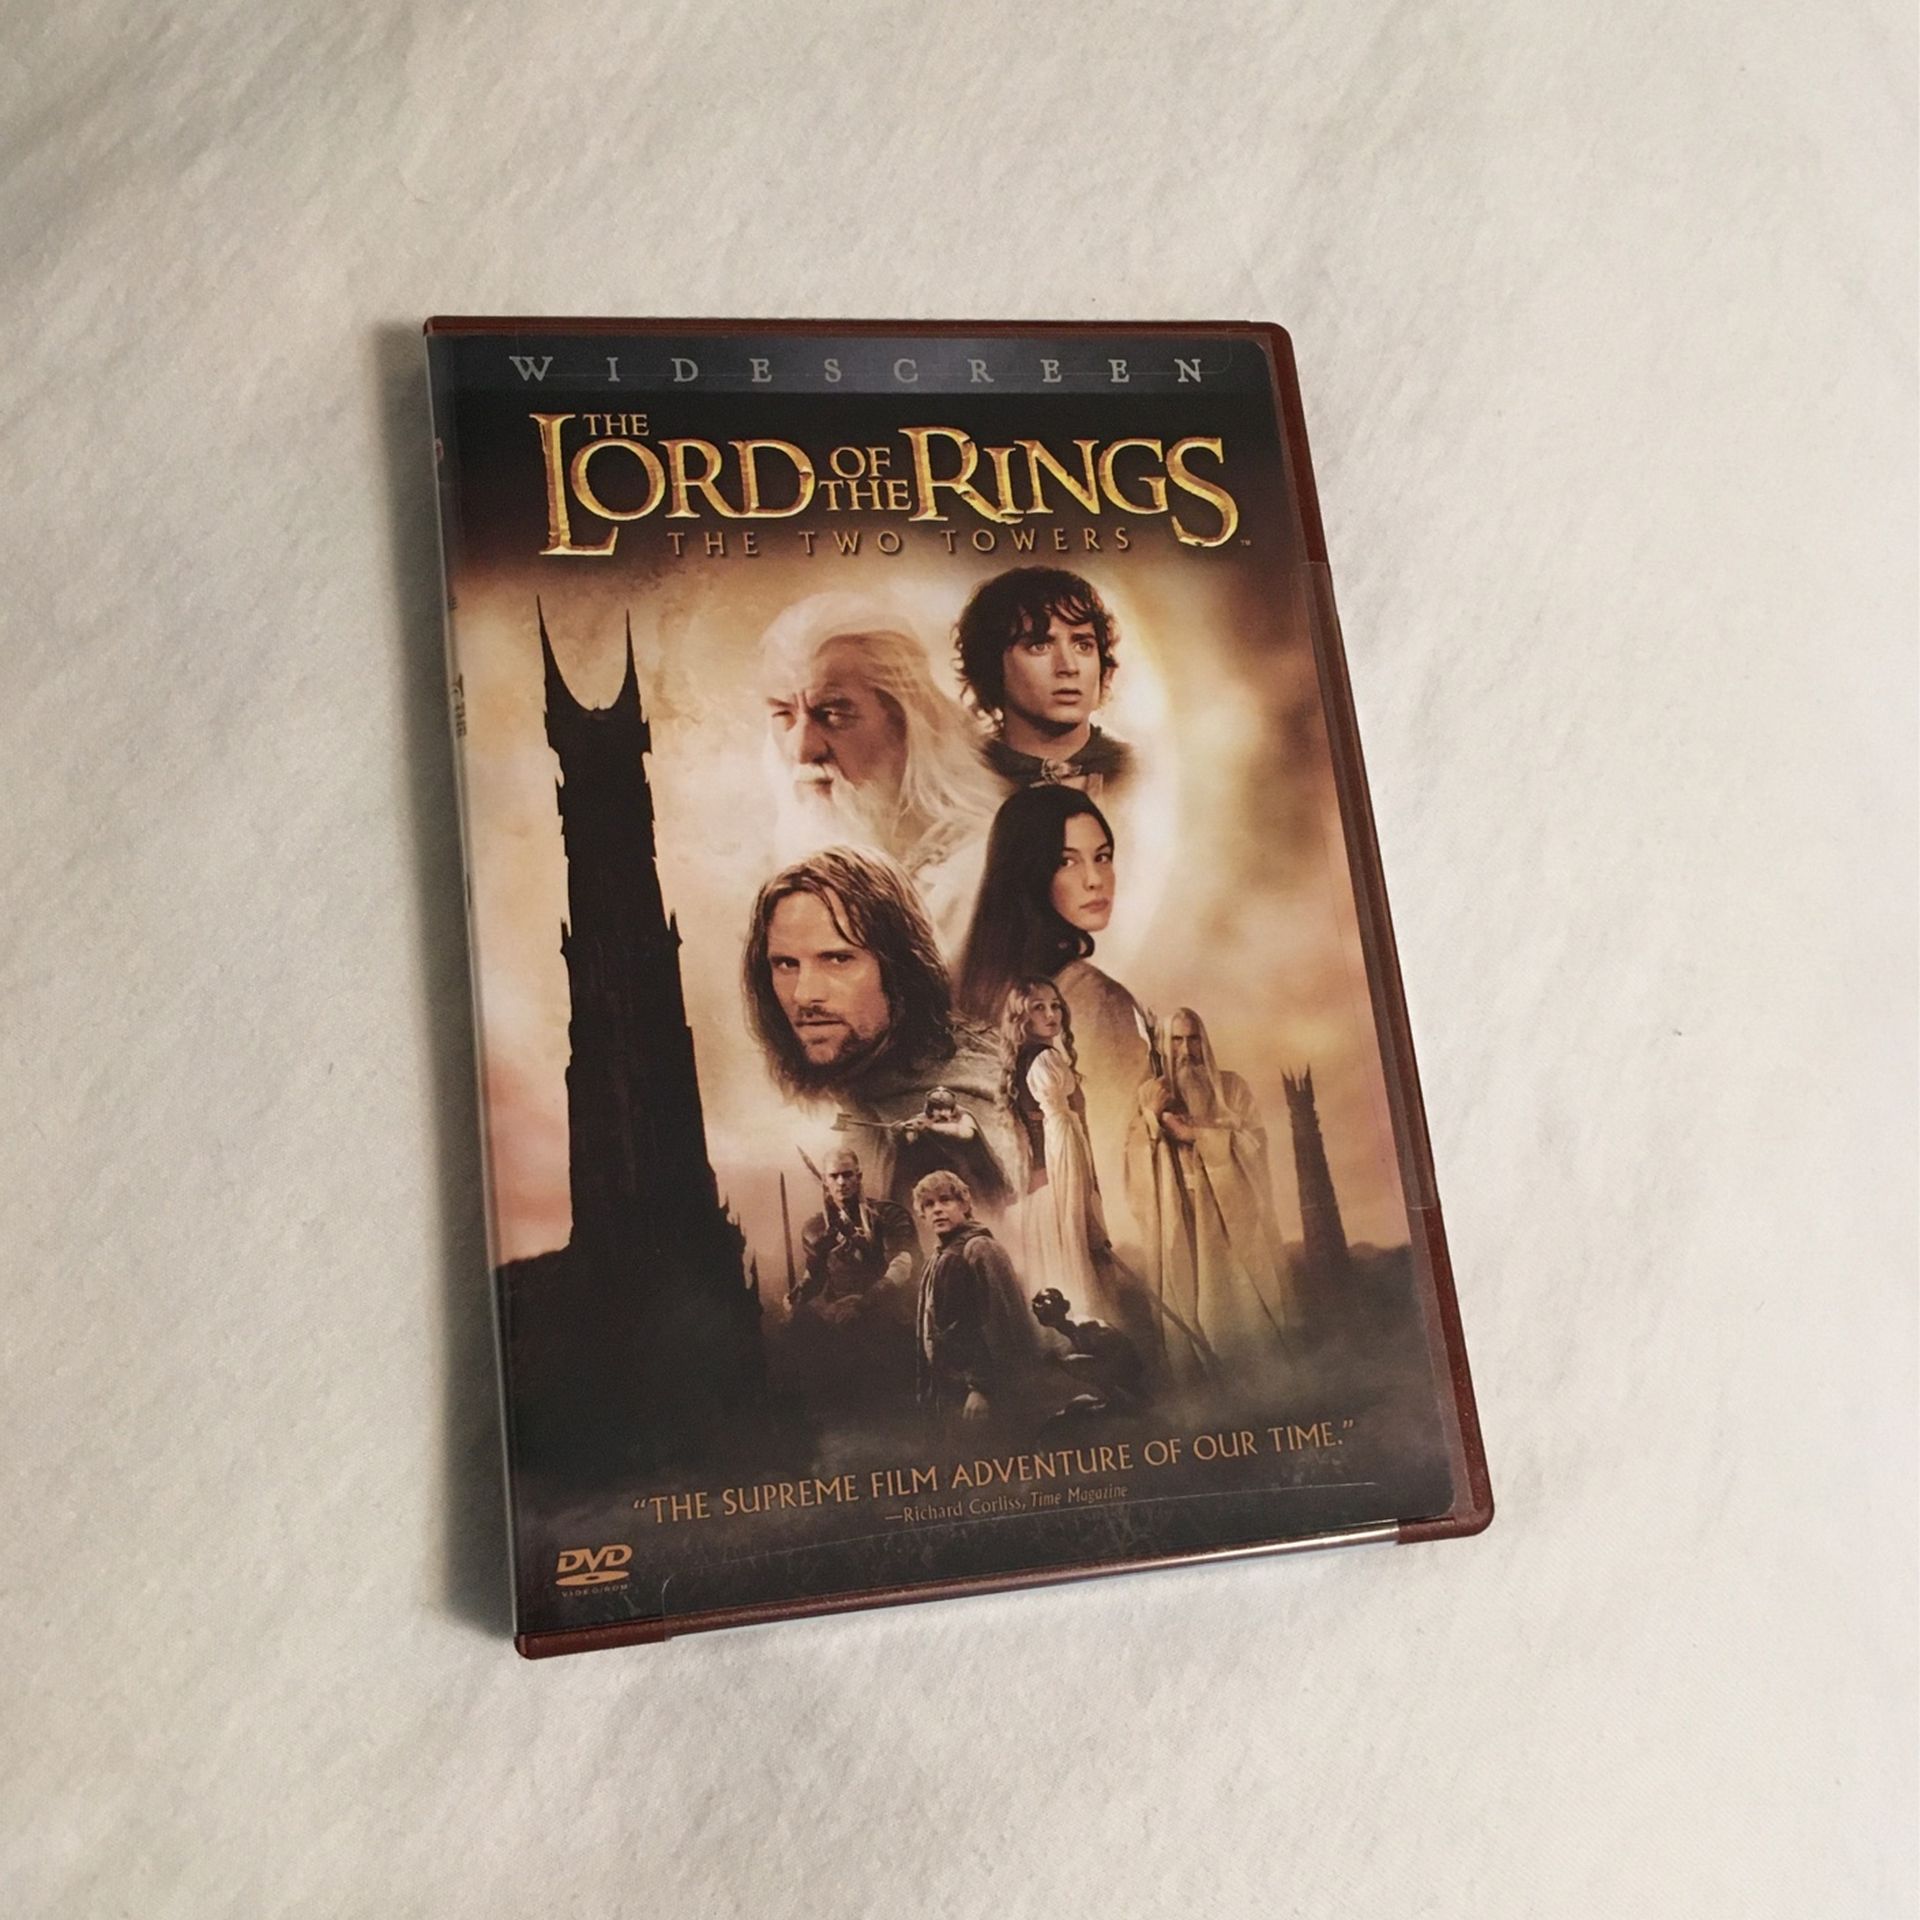 2 Disc-The Lord of The Rings: The Two Towers [Widescreen]